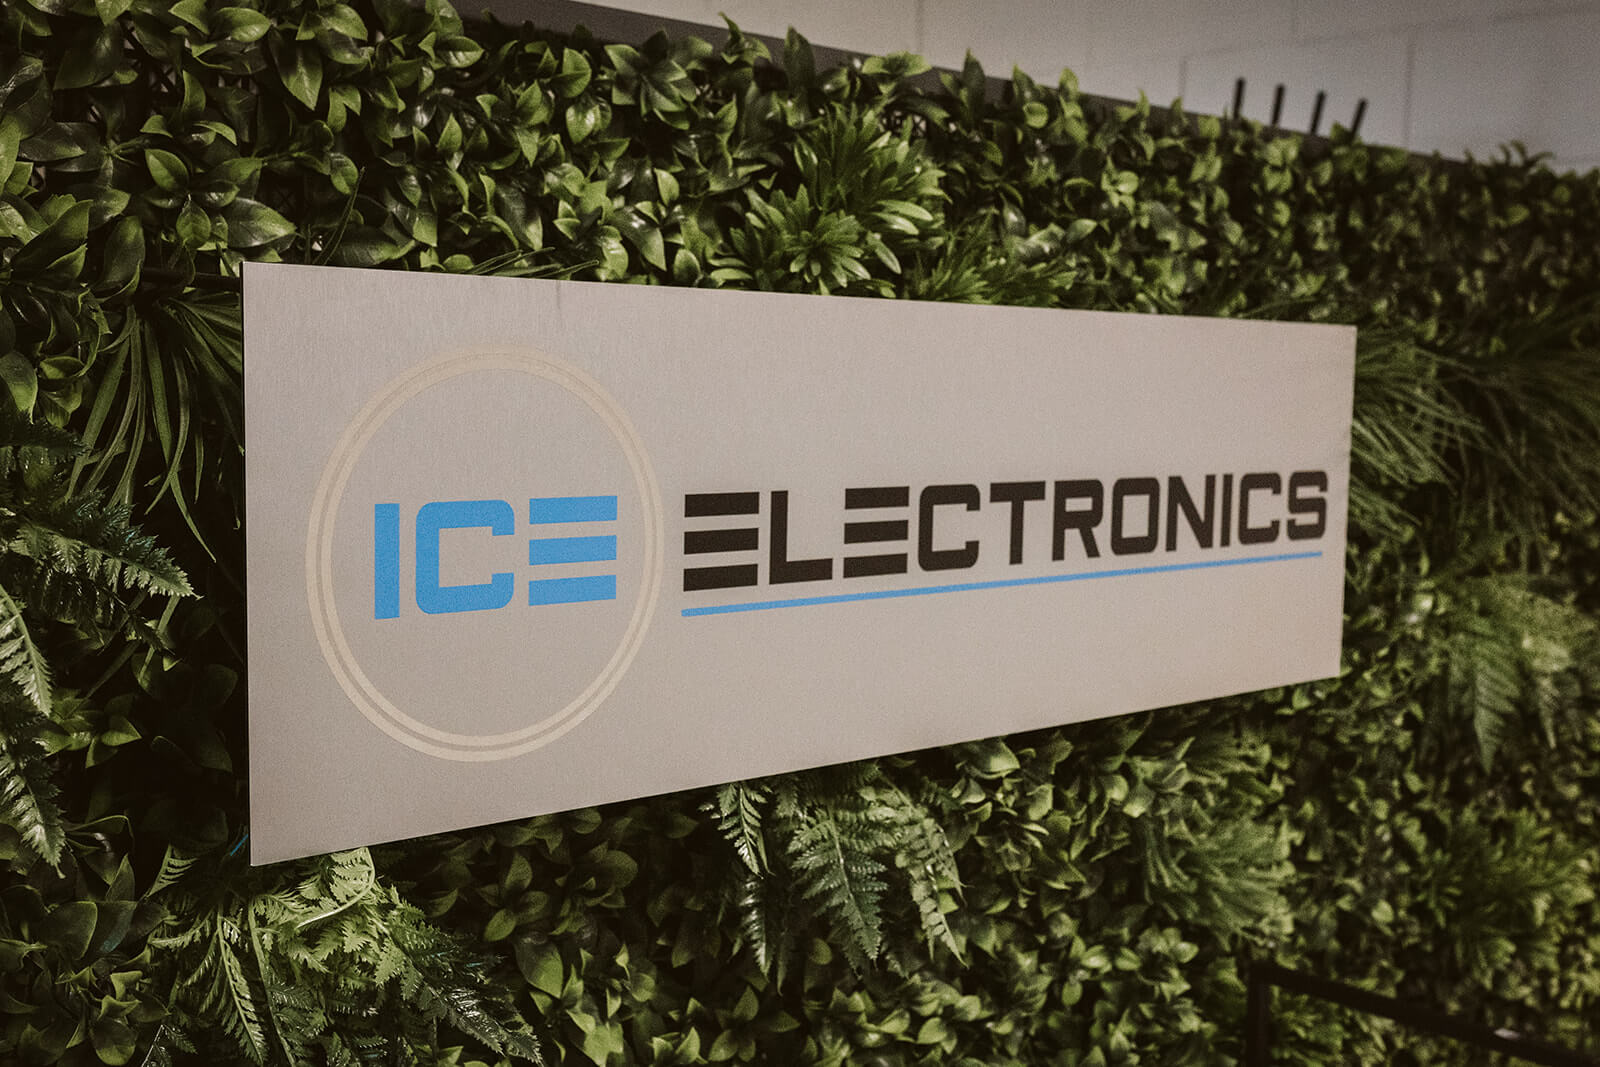 ICE Electronics - who we are